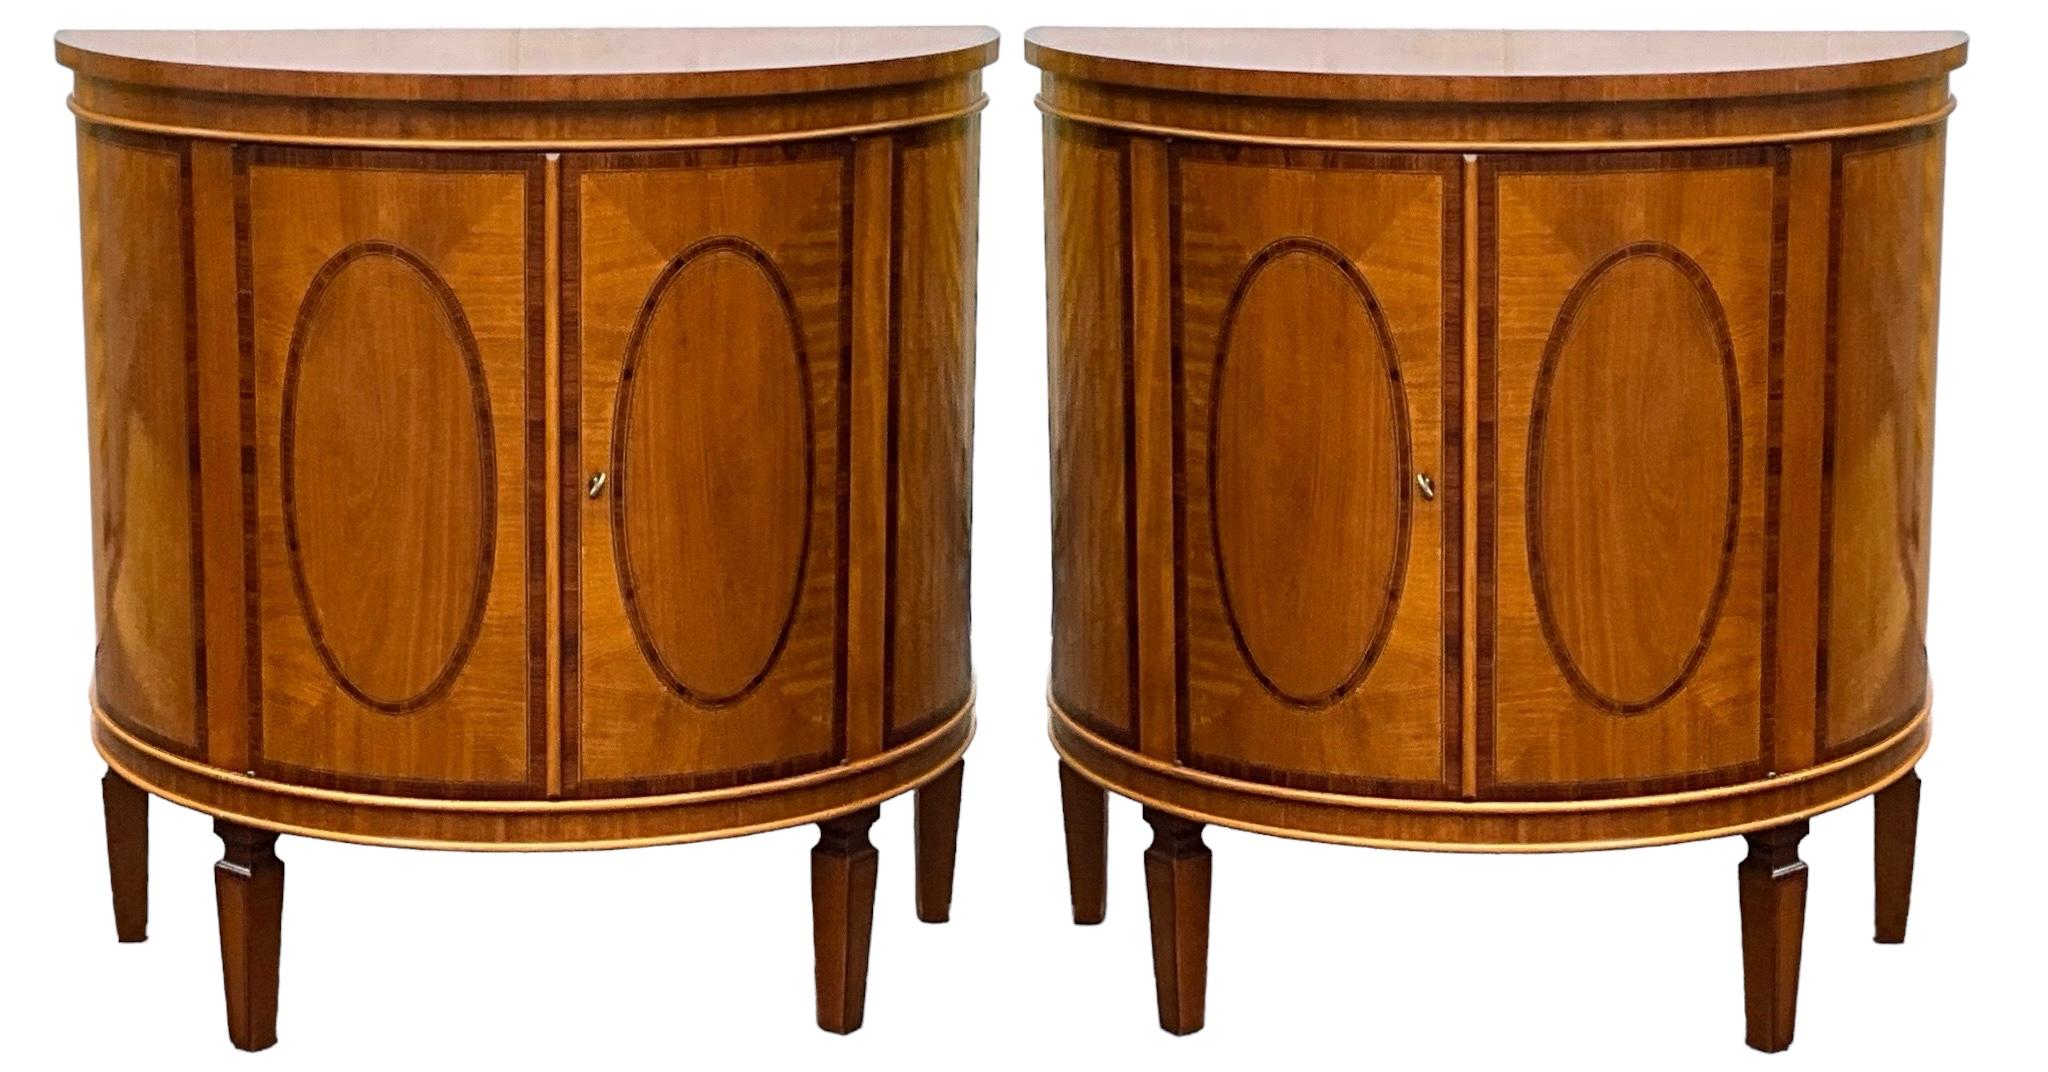 Fruitwood Italian Banded & Inlaid Satinwood Demilune Cabinets Att. Decorative Crafts -Pair For Sale